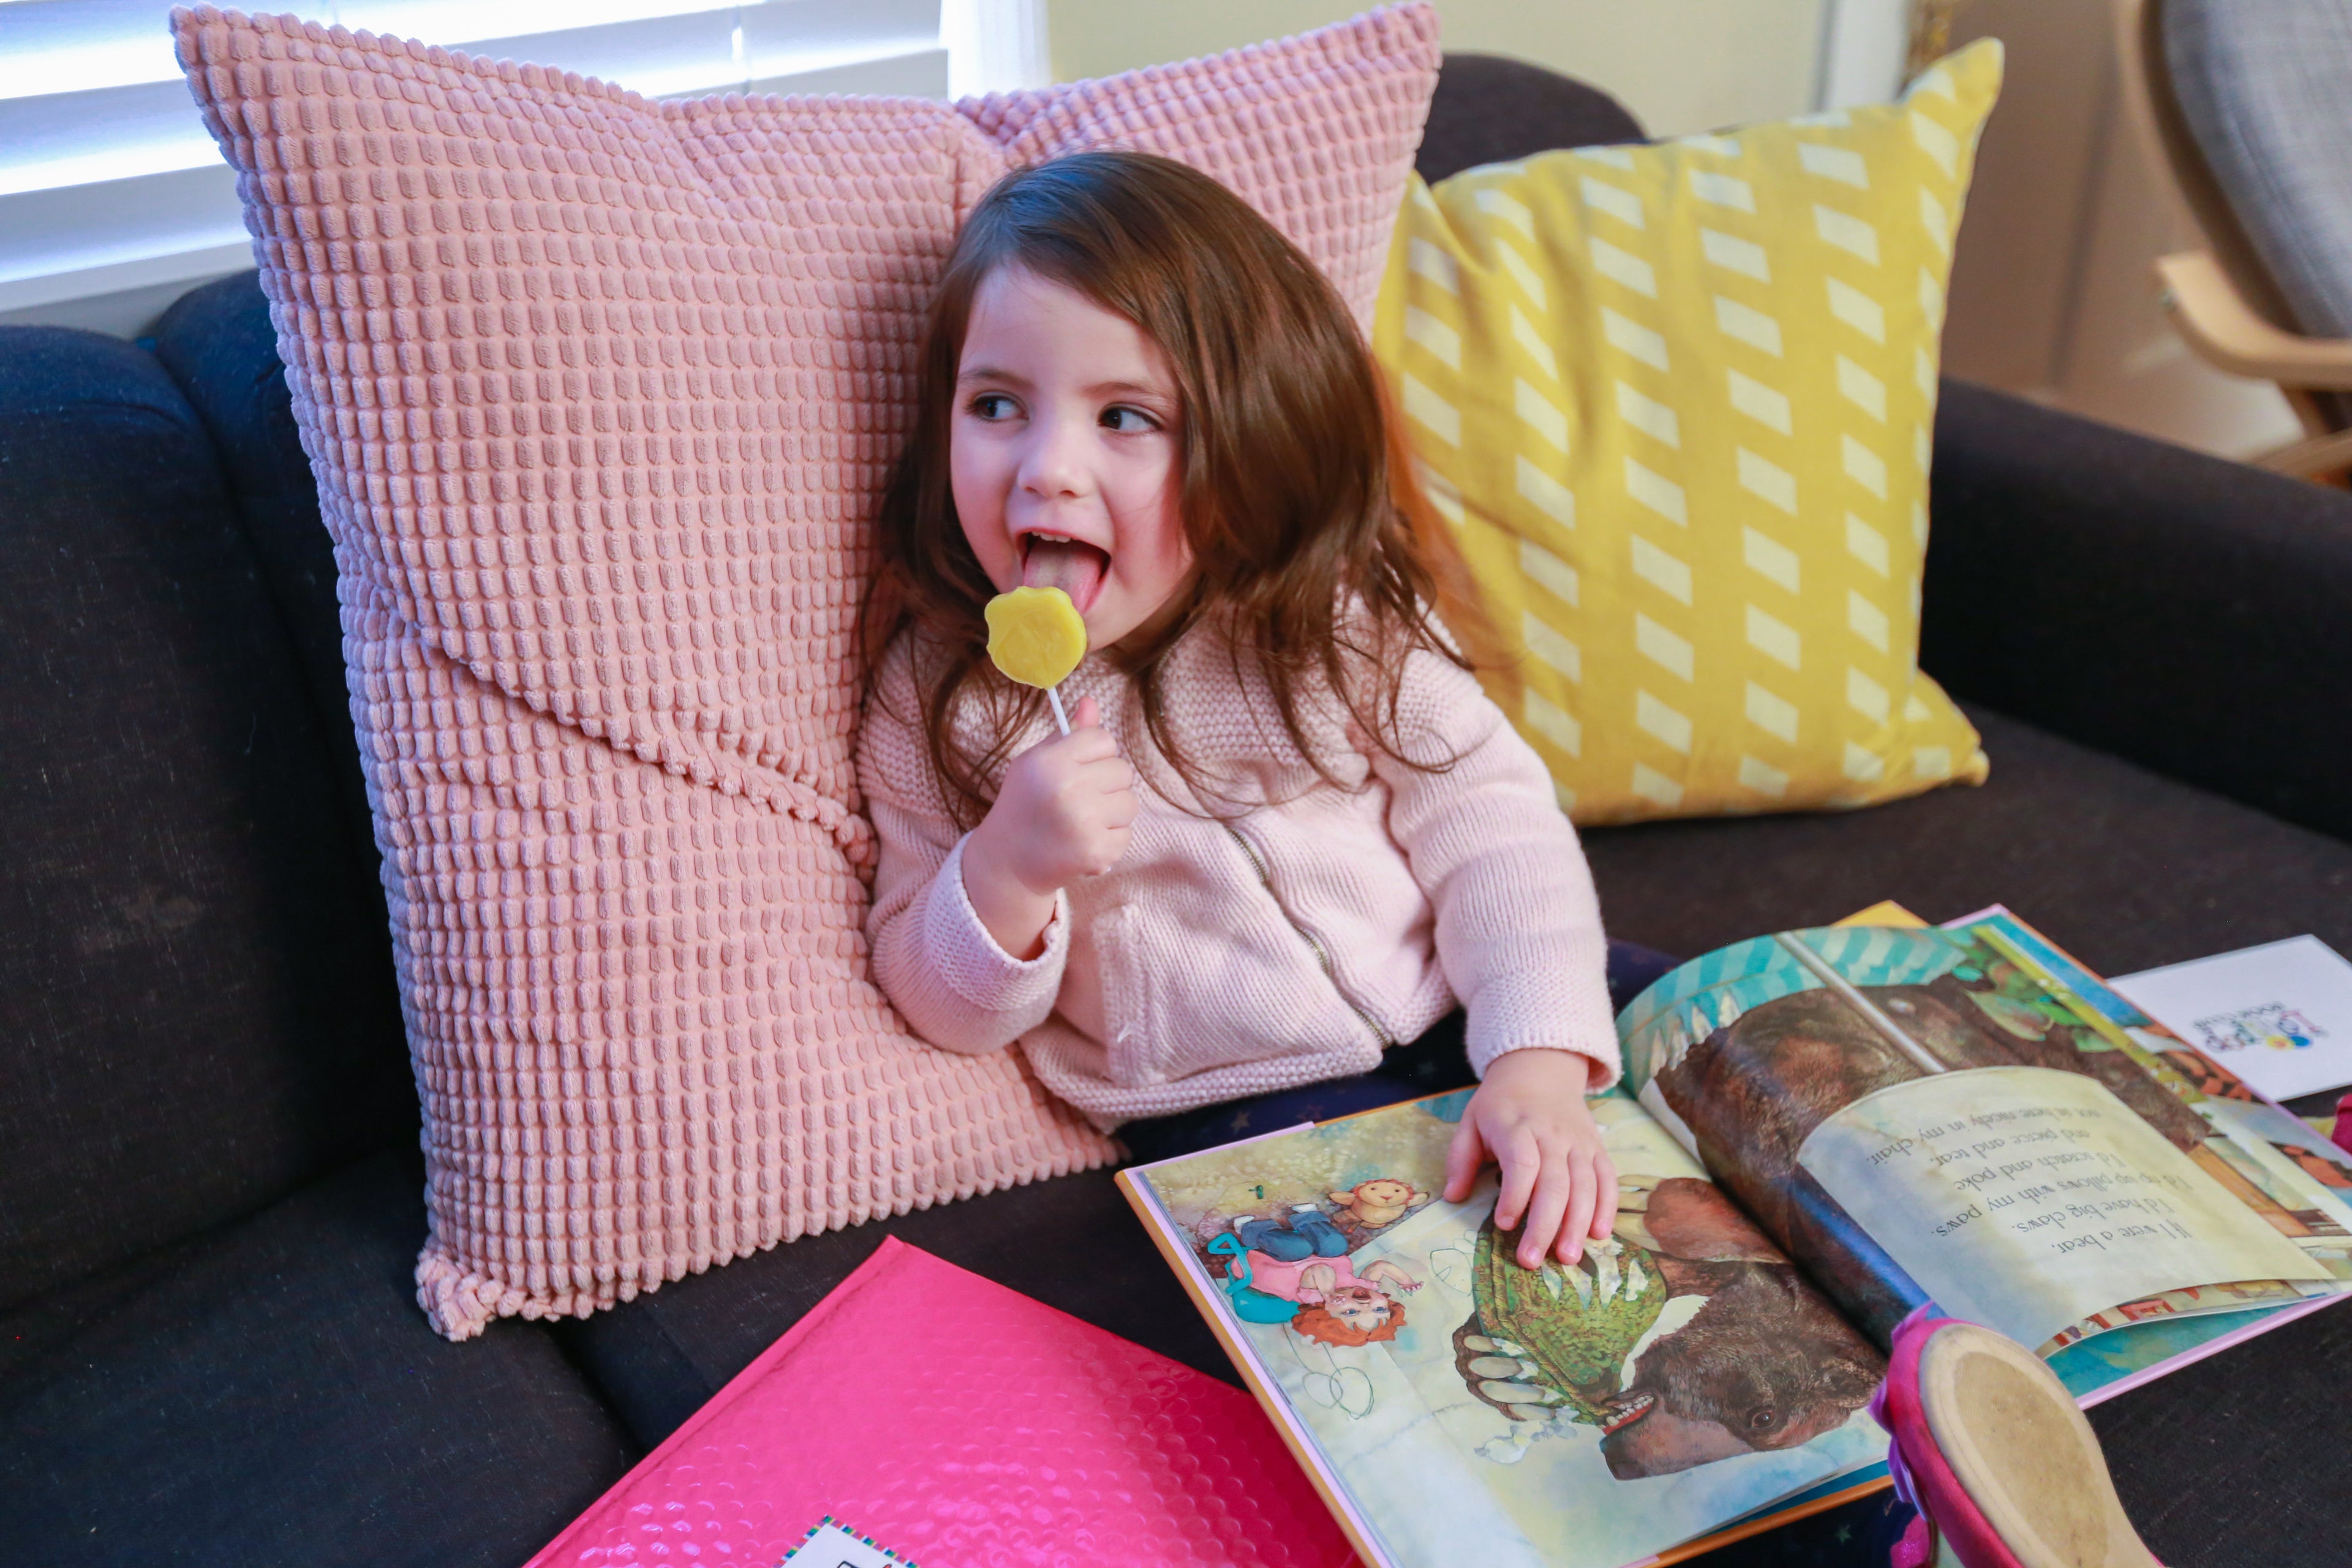 girl licking lollipop and reading books